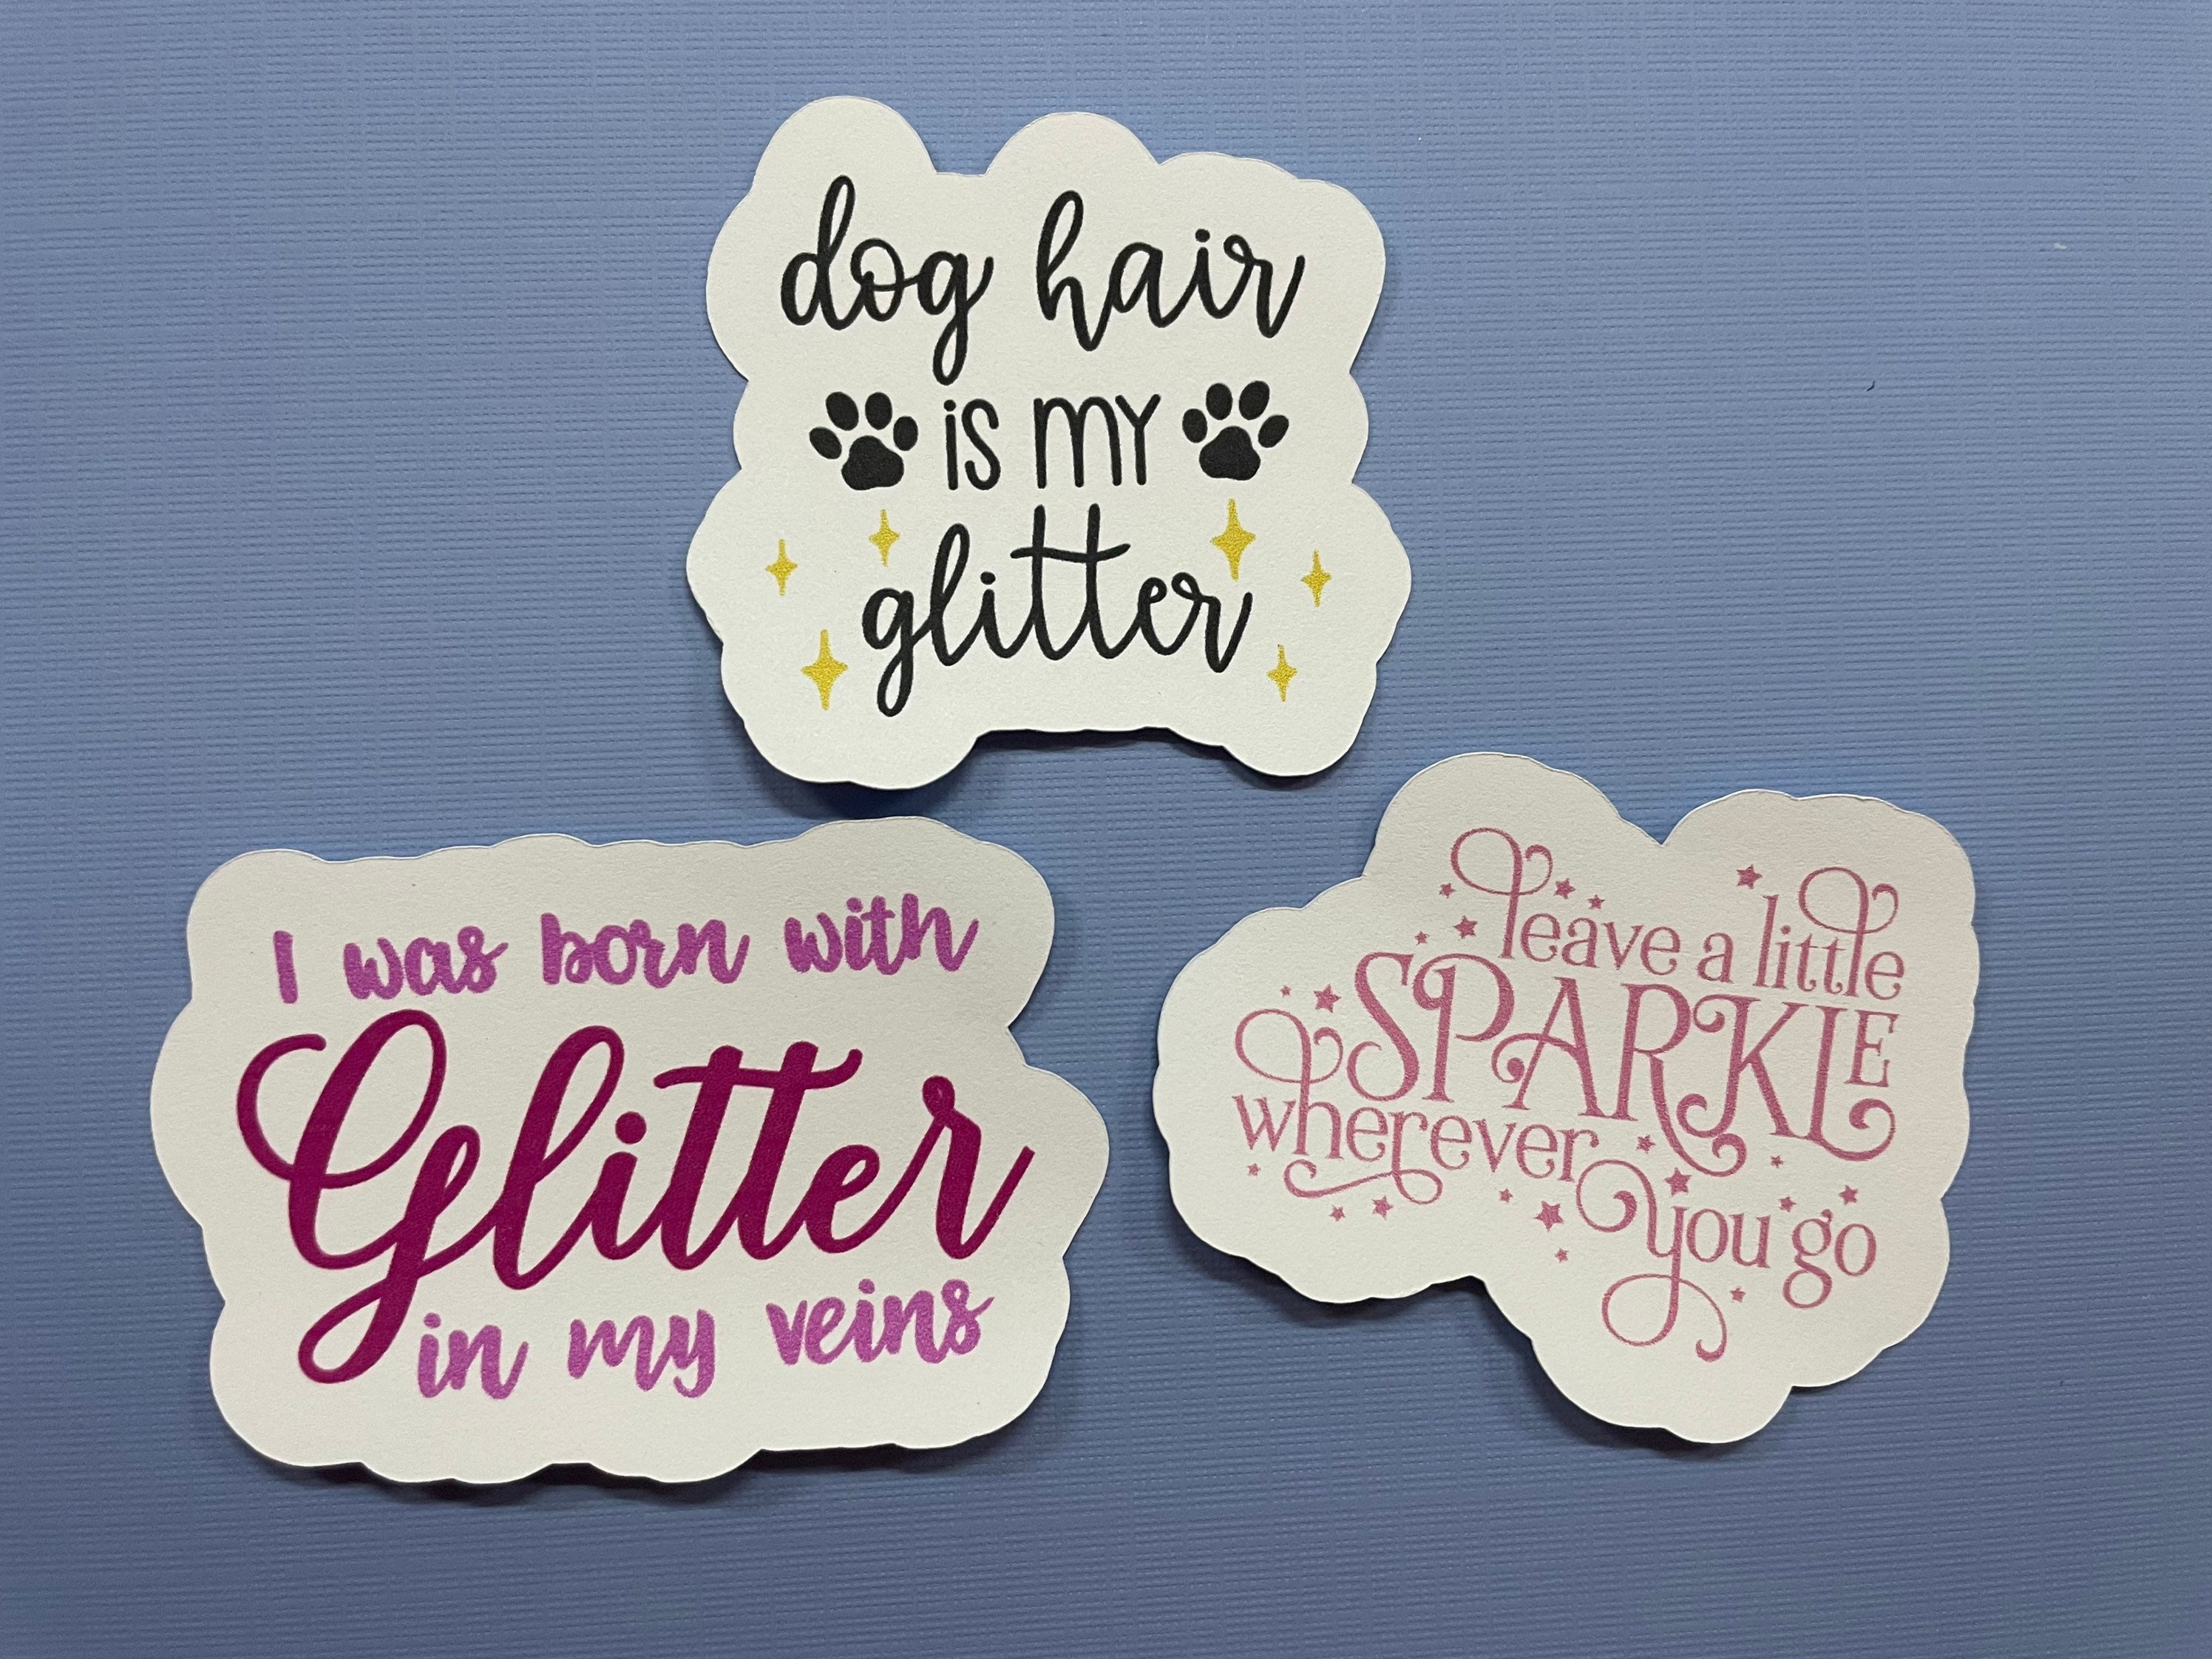 Stickers that sparkle ✨ Glitter stickers are now available!, Blog